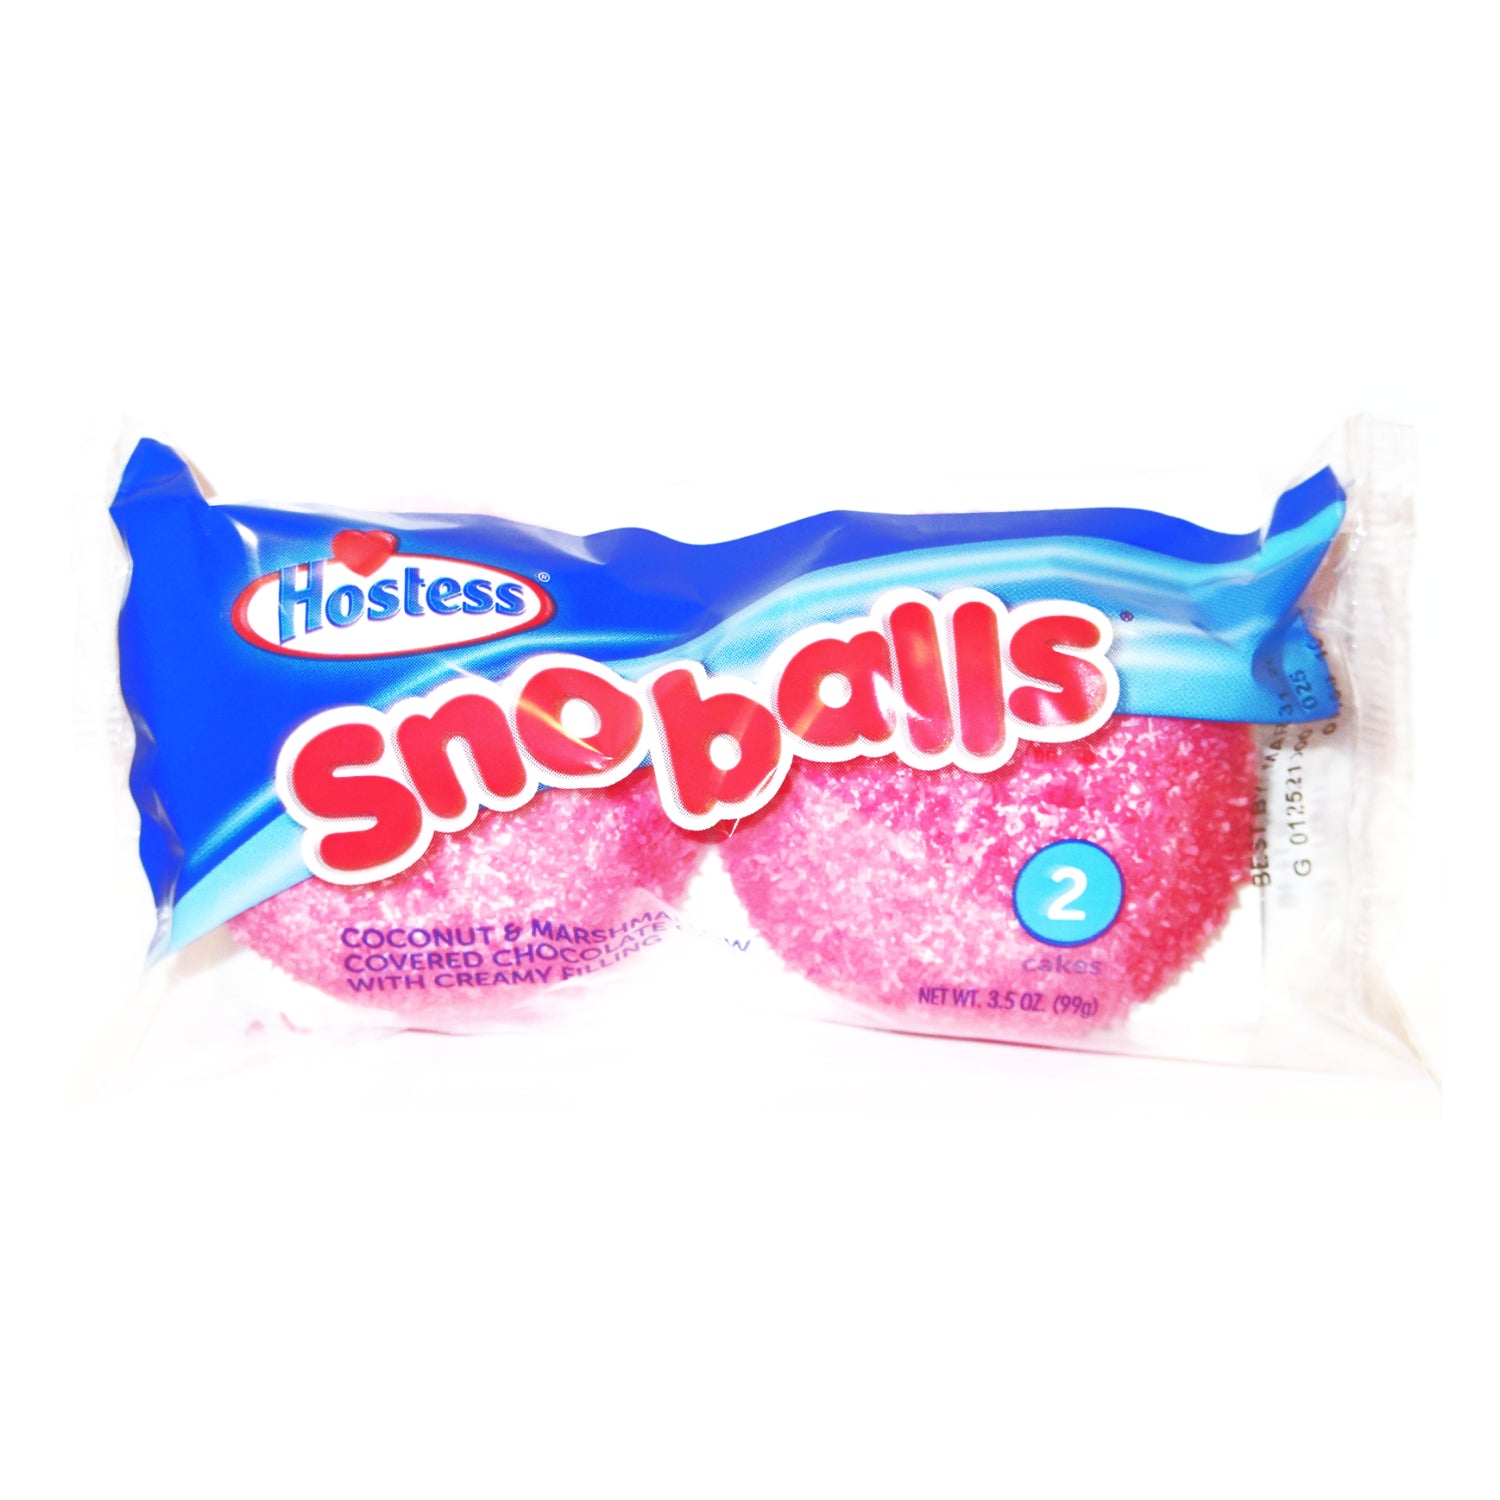 Sno Balls (coconut, marshmallow, and chocolate snack)